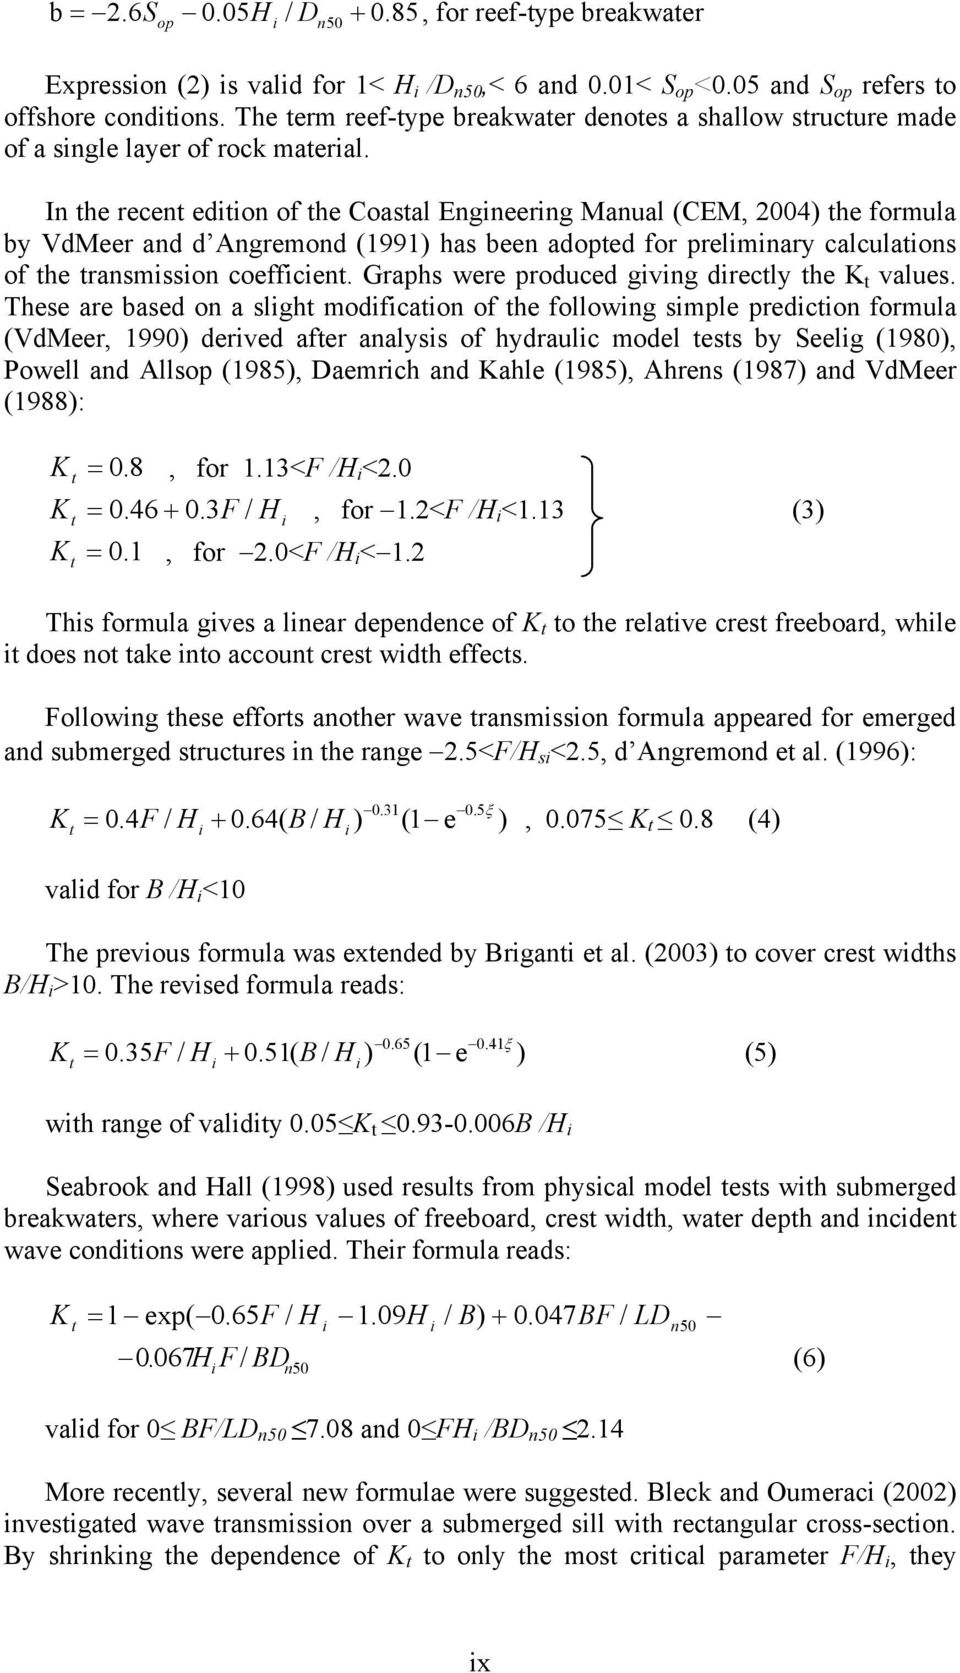 In the recent edition of the Coastal Engineering Manual (CEM, 2004) the formula by VdMeer and d Angremond (1991) has been adopted for preliminary calculations of the transmission coefficient.